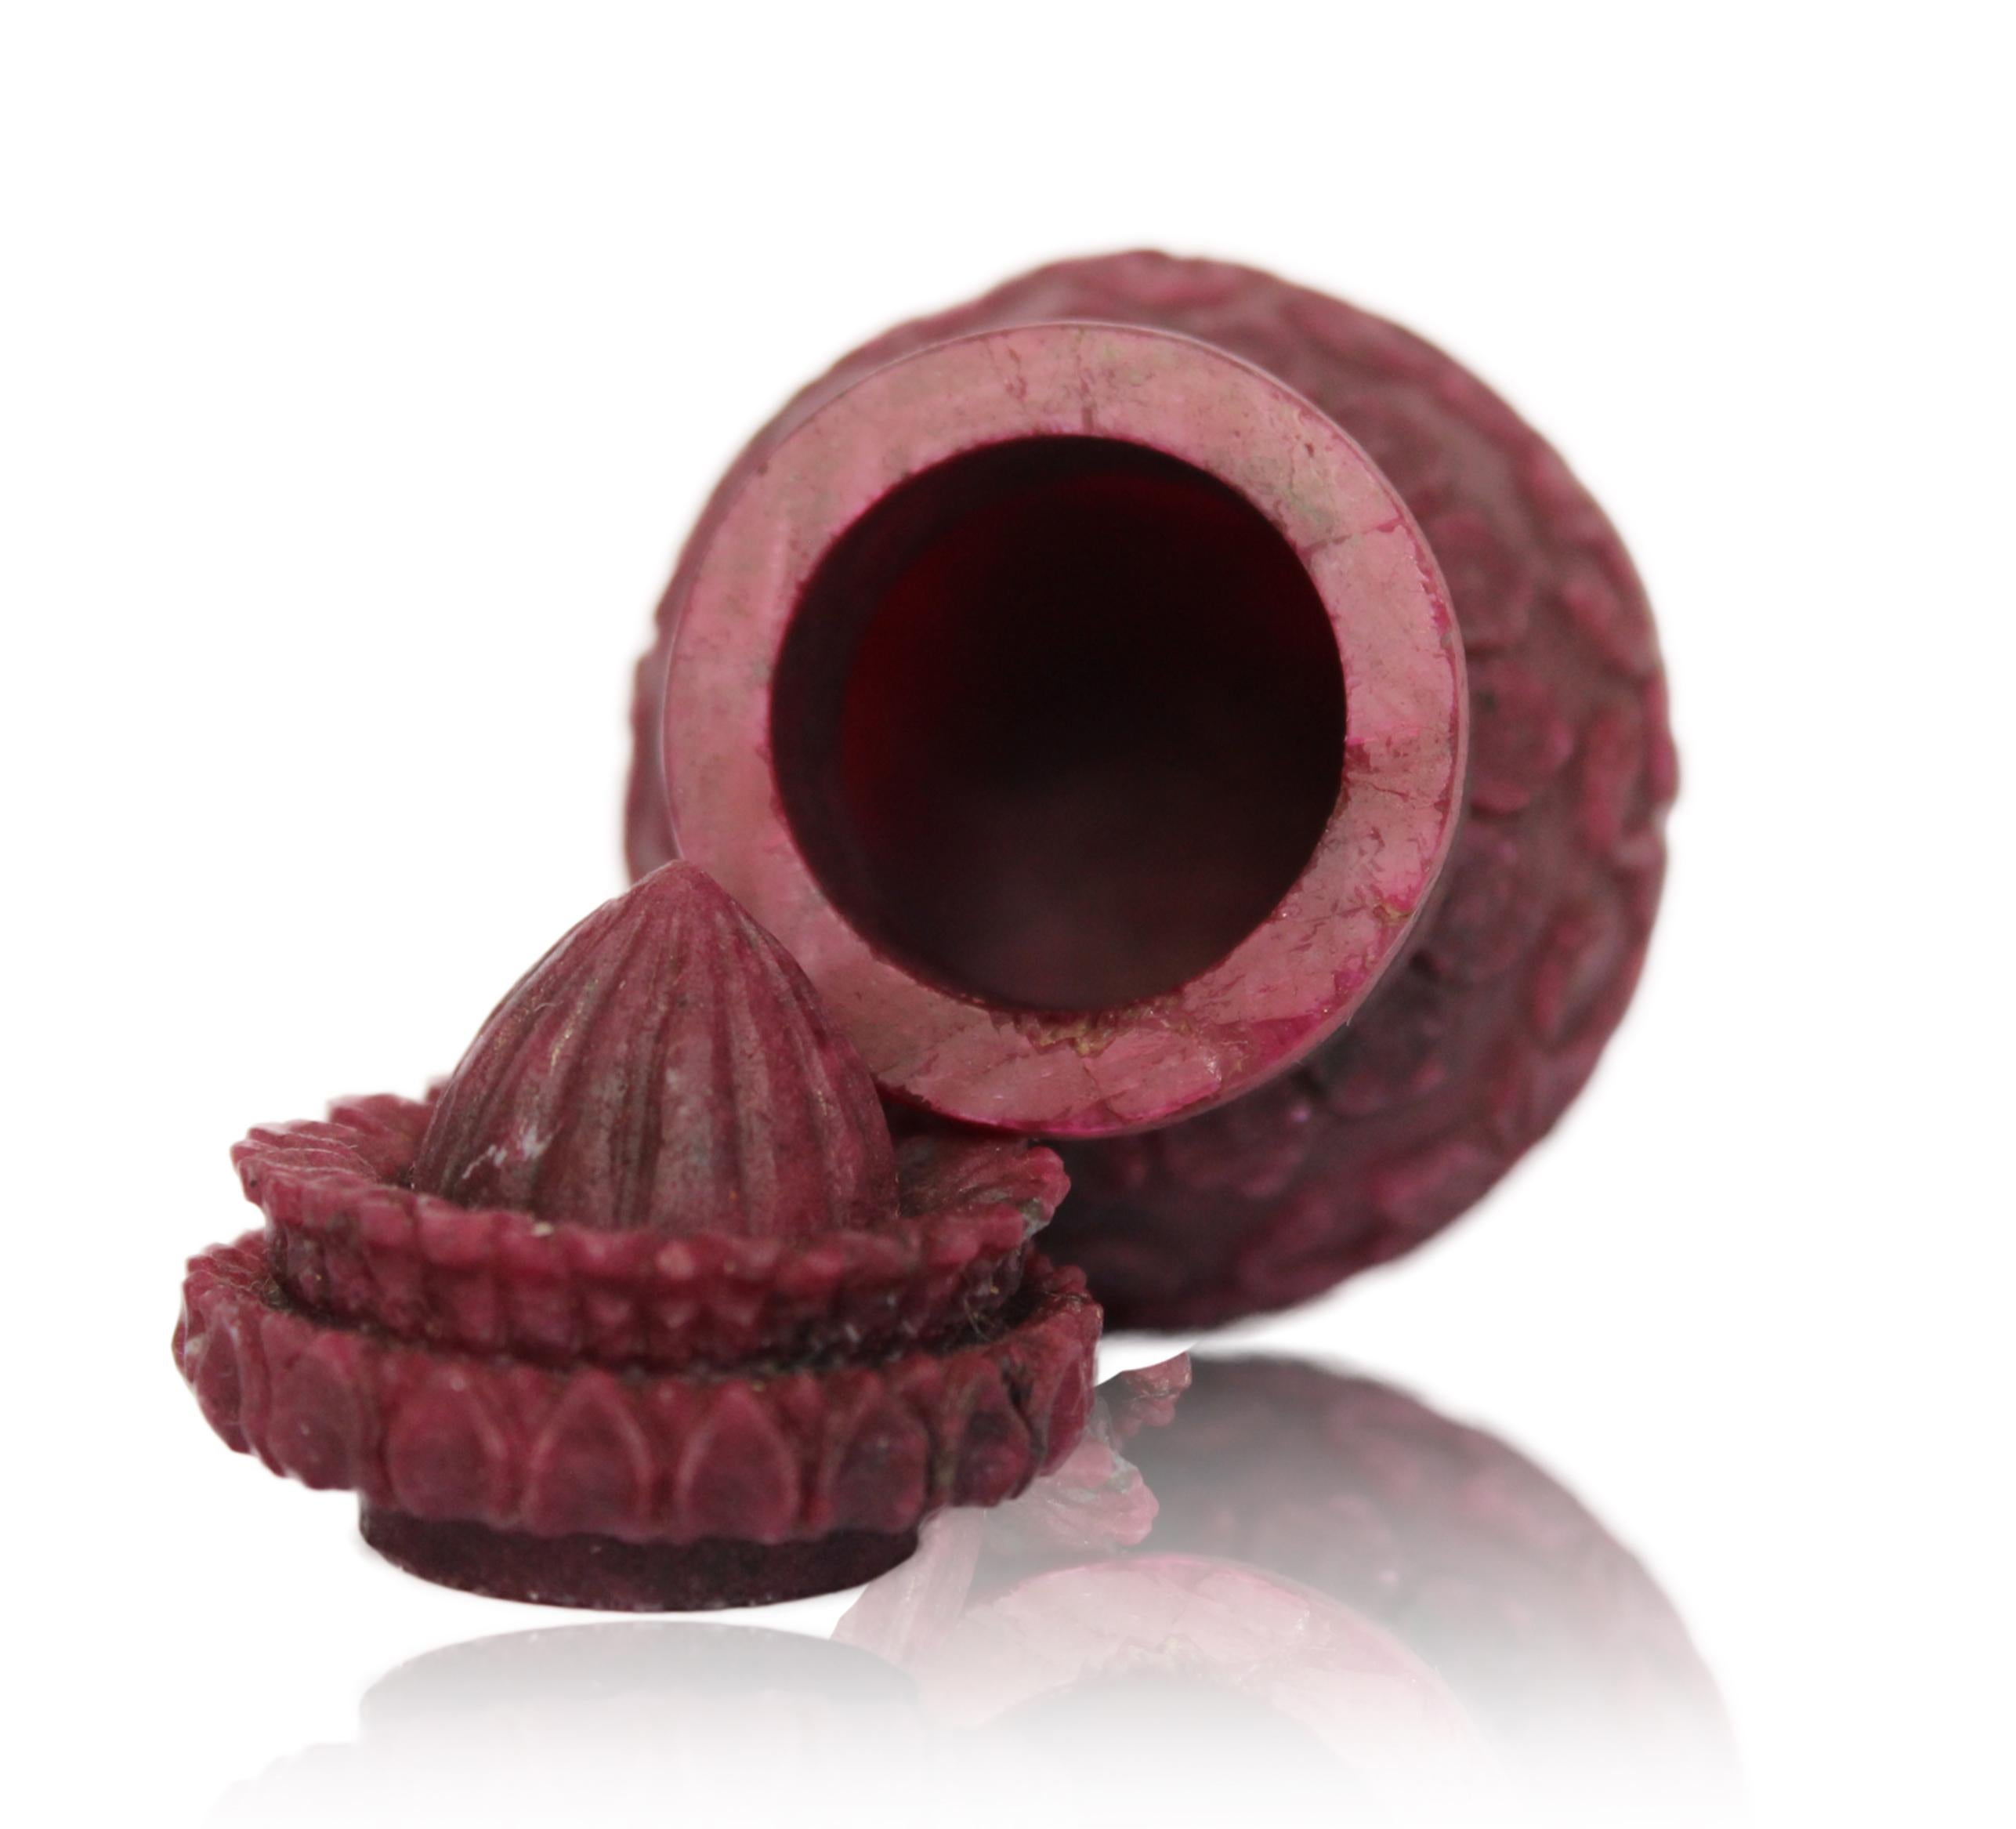 Uncut Small Hand Carved Mughal Ruby Snuff / Vermilion Bottle 'Kalash' For Sale